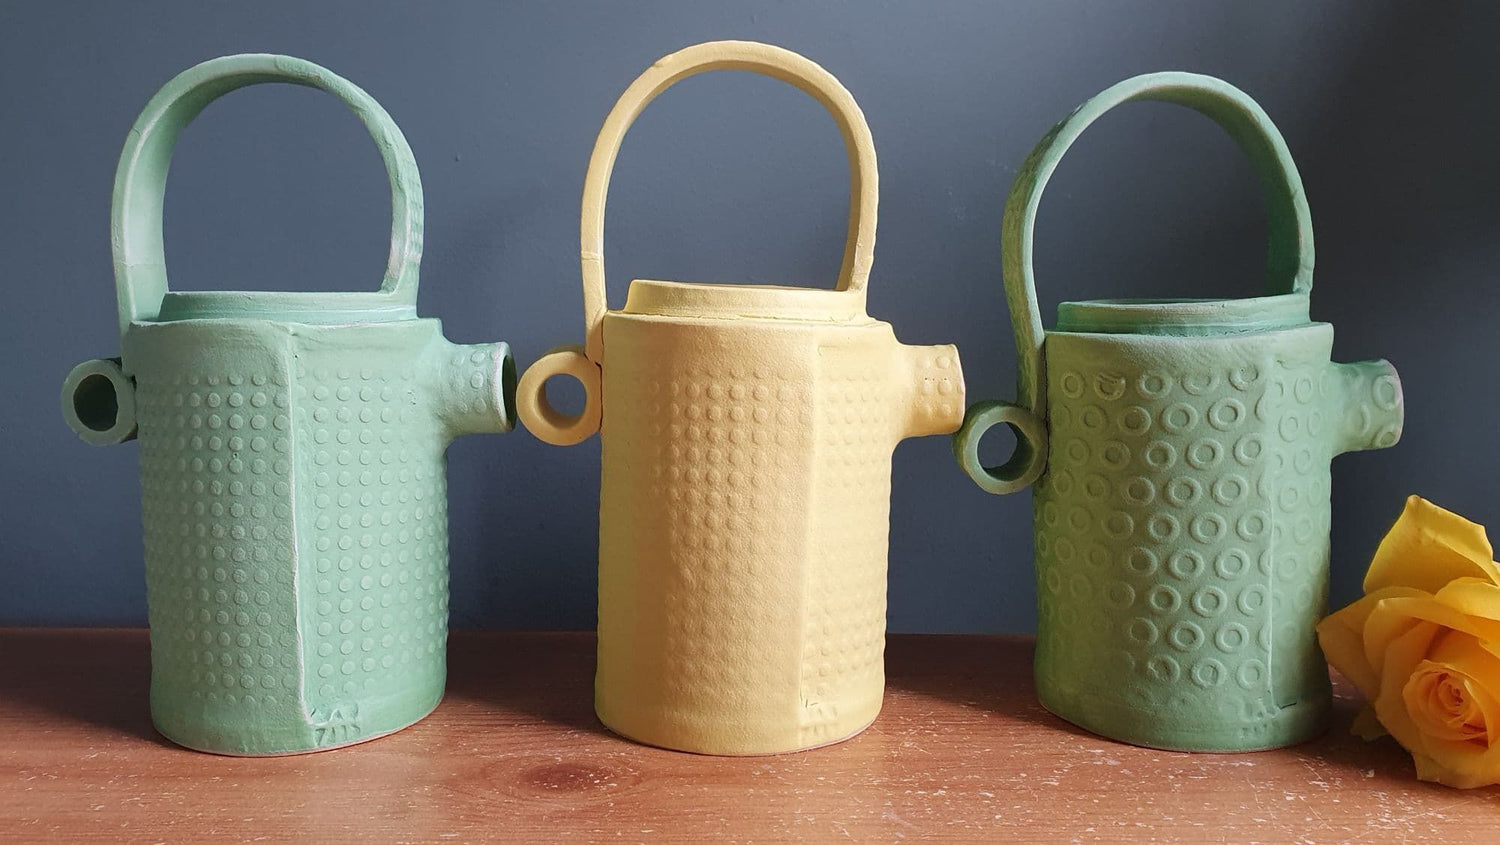 Unique jugs and pourers with loops